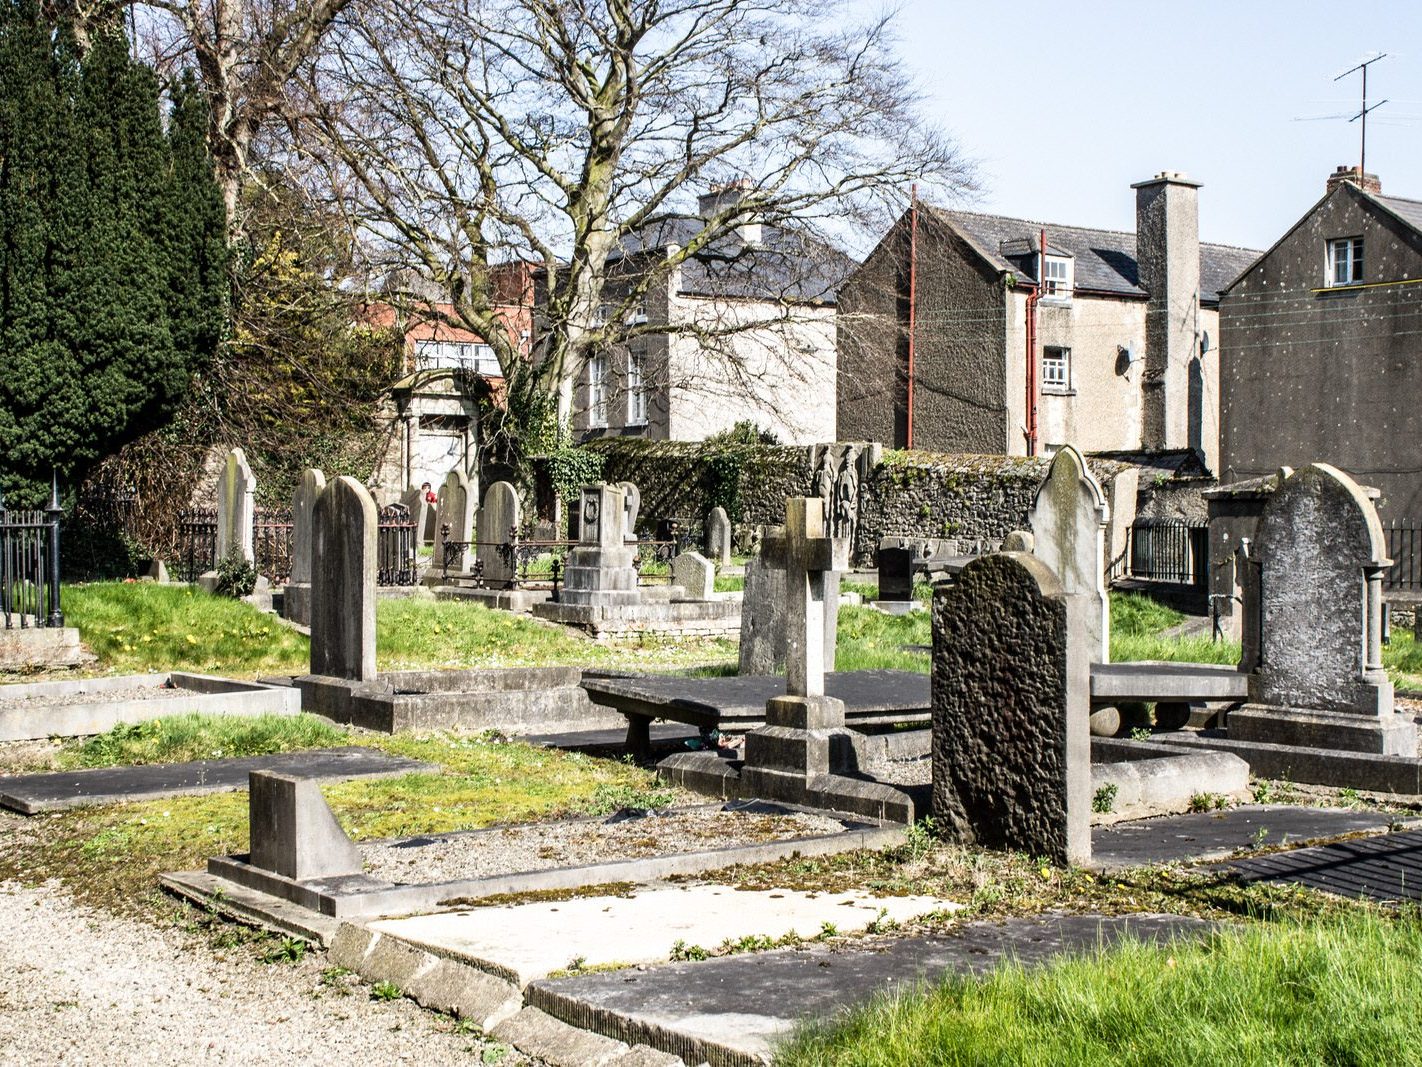 SOME OLD IMAGES OF ST PETERS CHURCHYARD IN DROGHEDA [PHOTOGRAPHED 20212]-224234-1